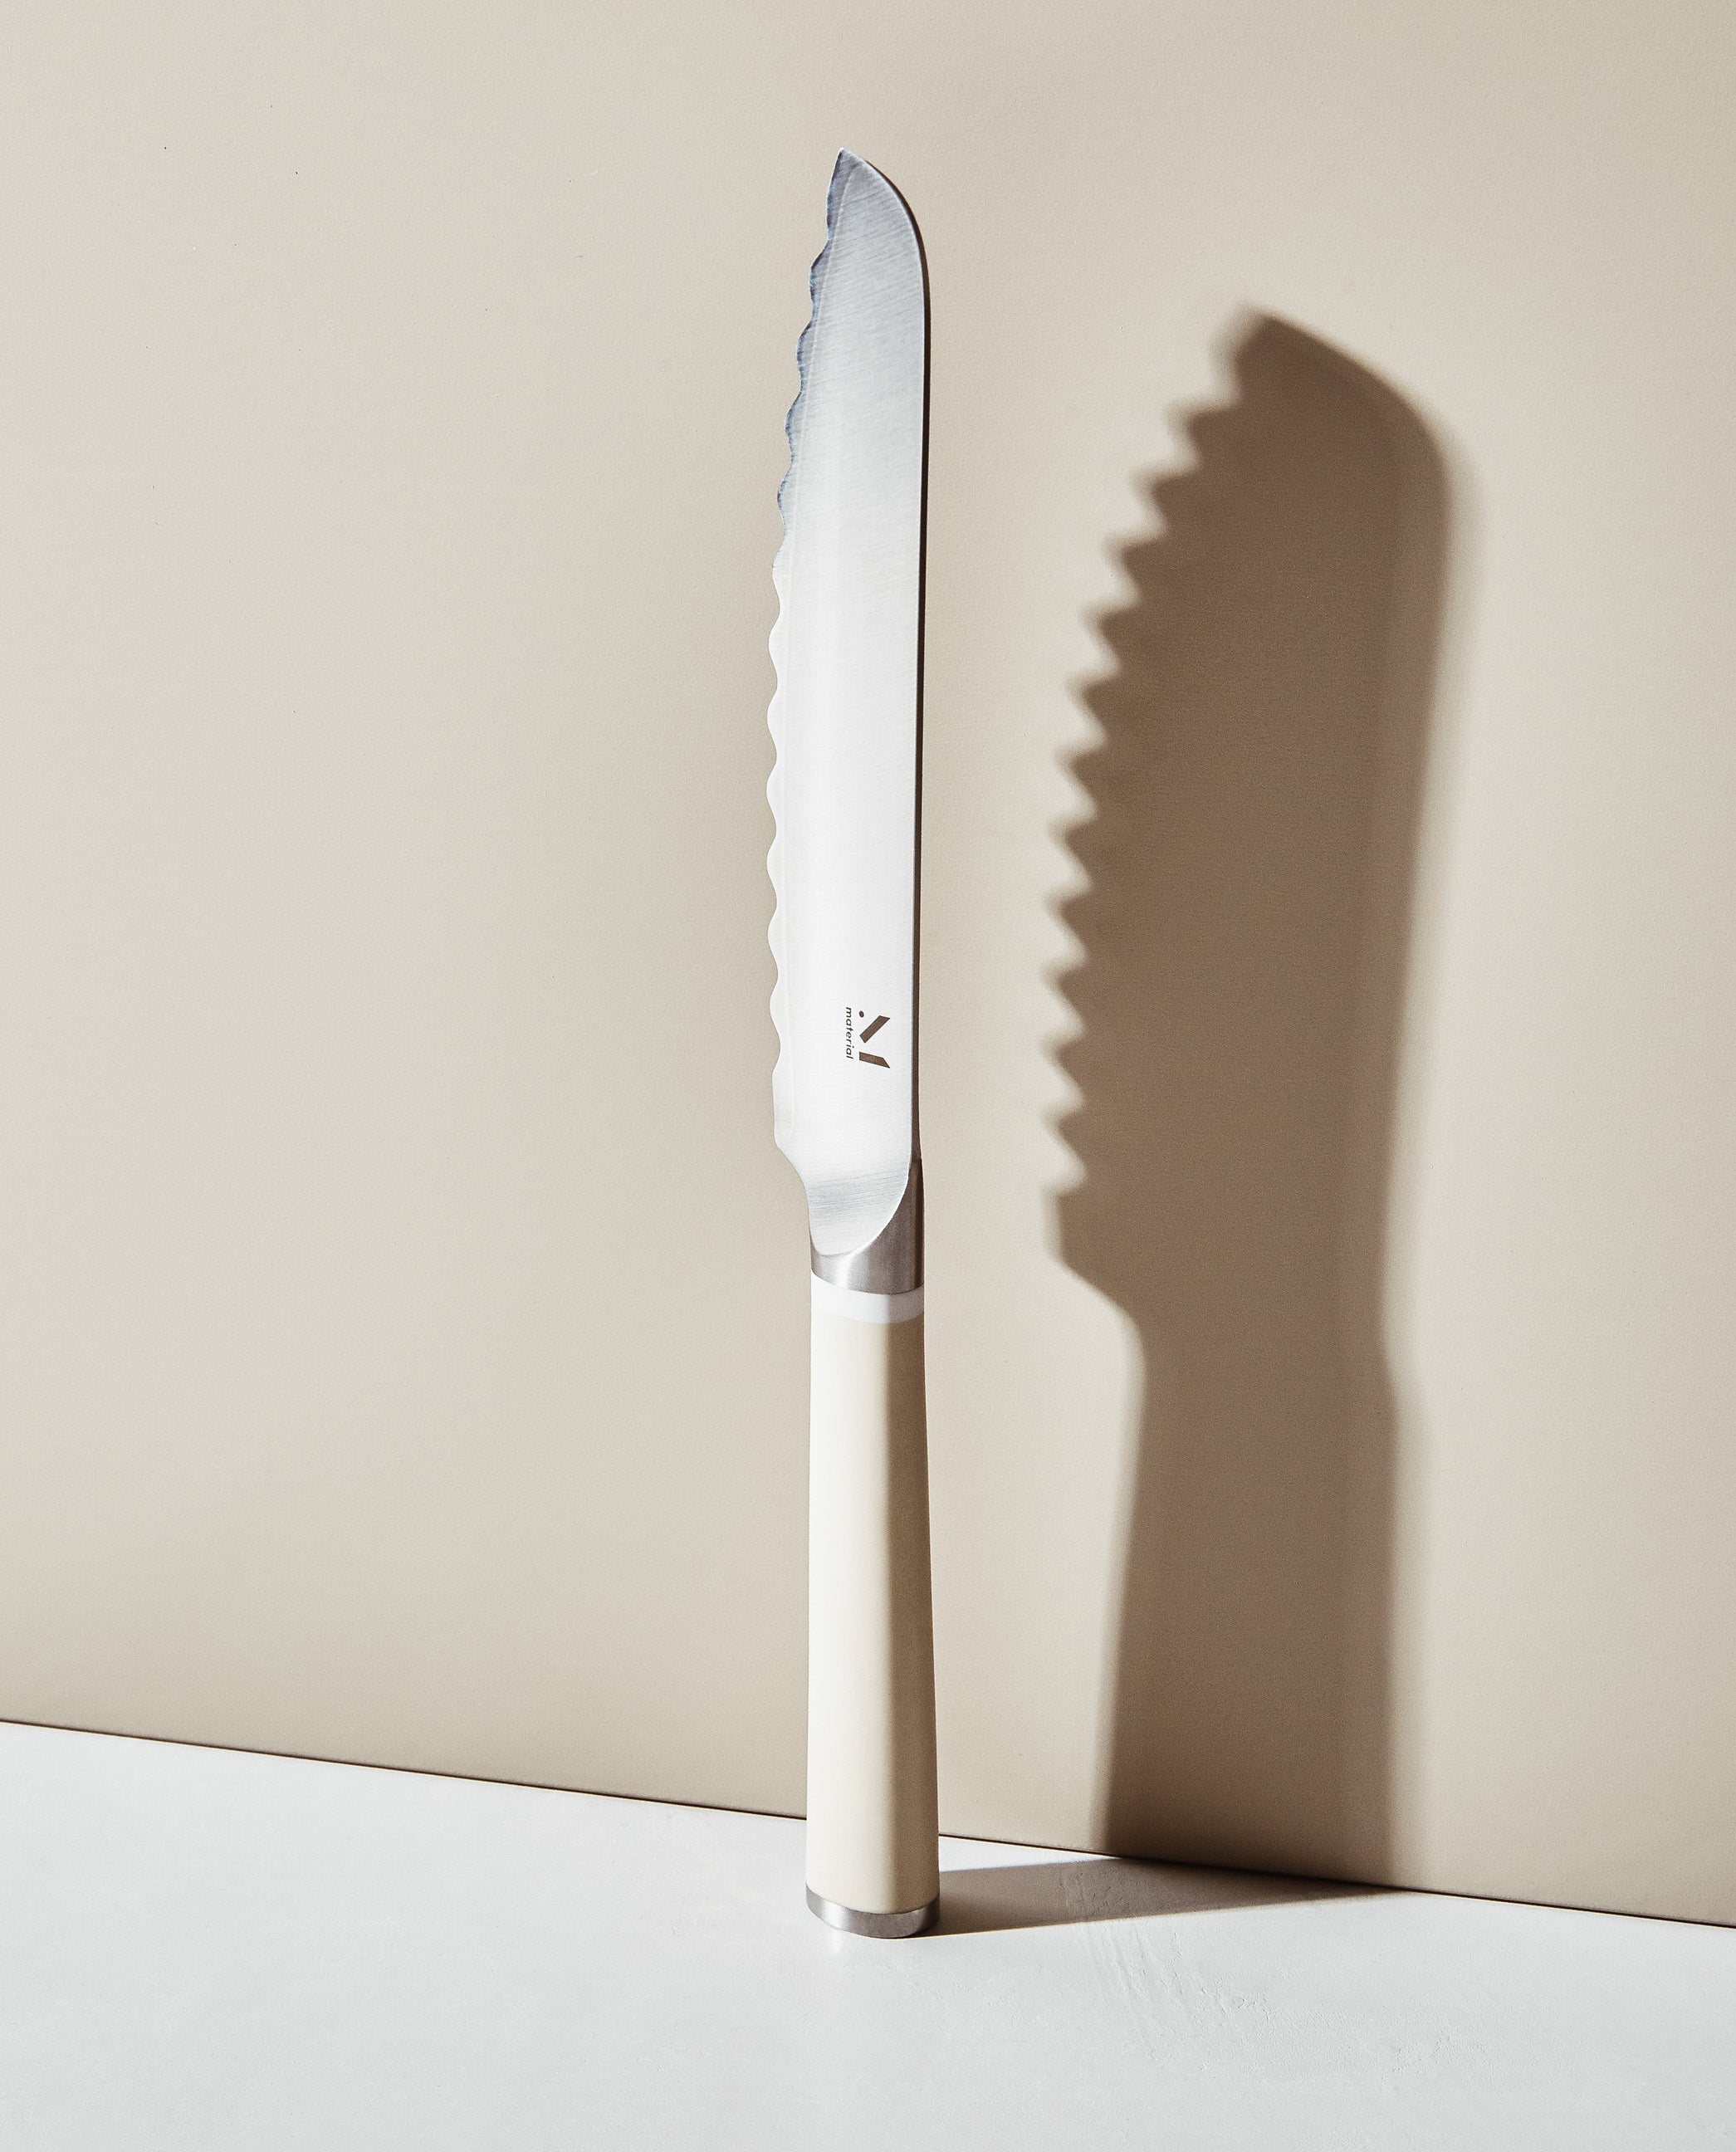 Oprah is Obsessed With These Affordable Kitchen Knives—And They're